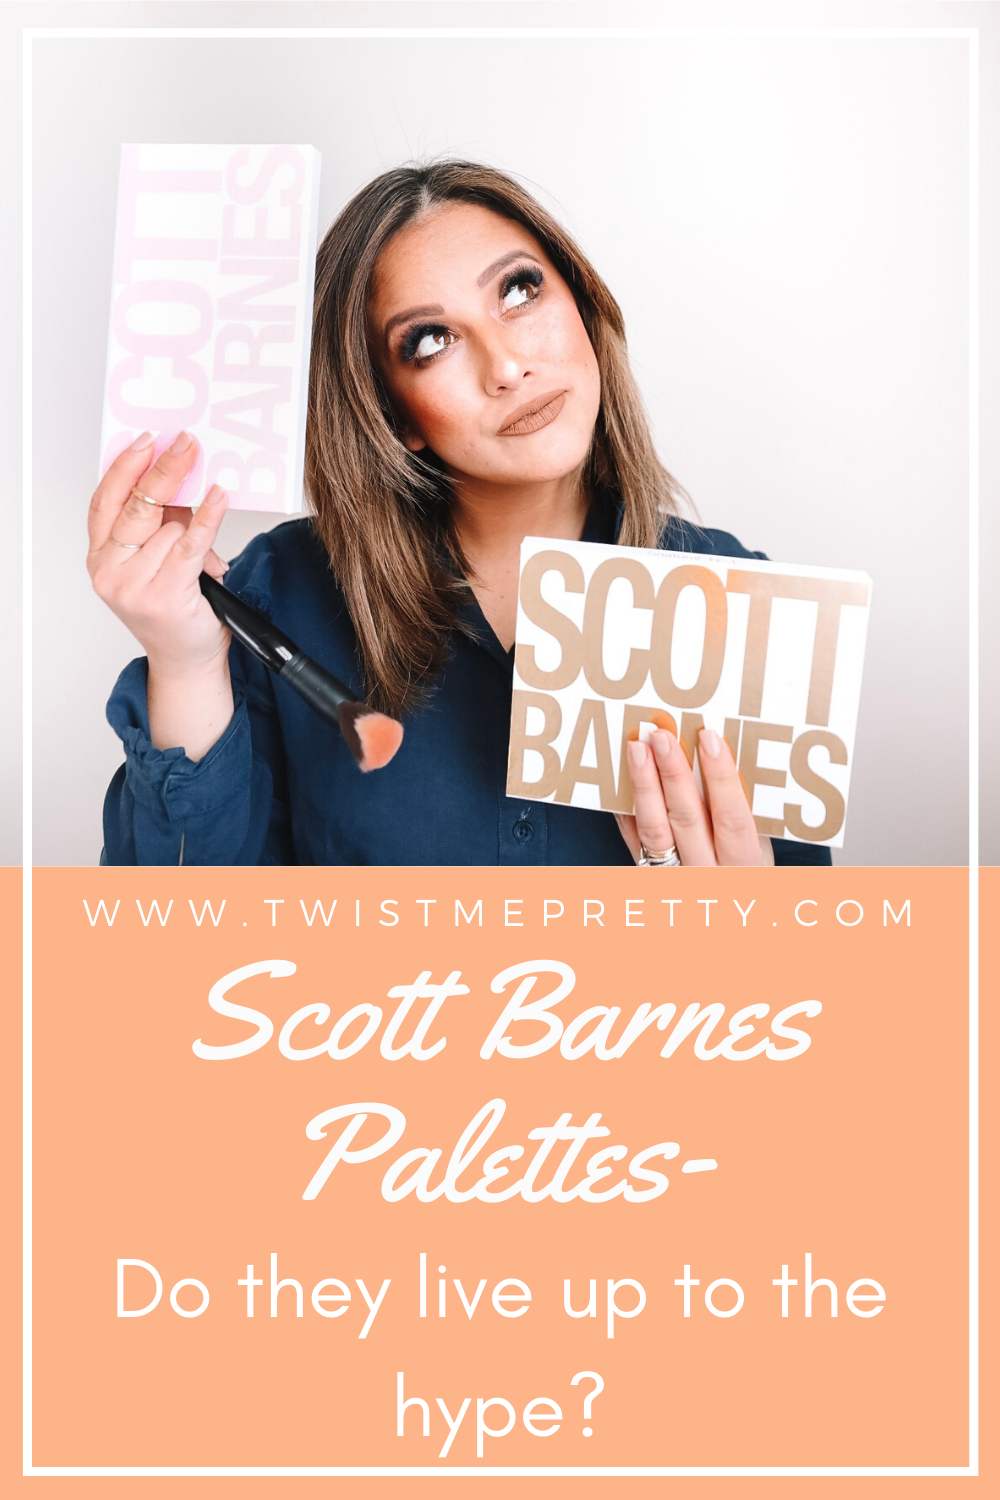 Scott Barnes Palettes- Do they live up to the hype? www.TwistMePretty.com